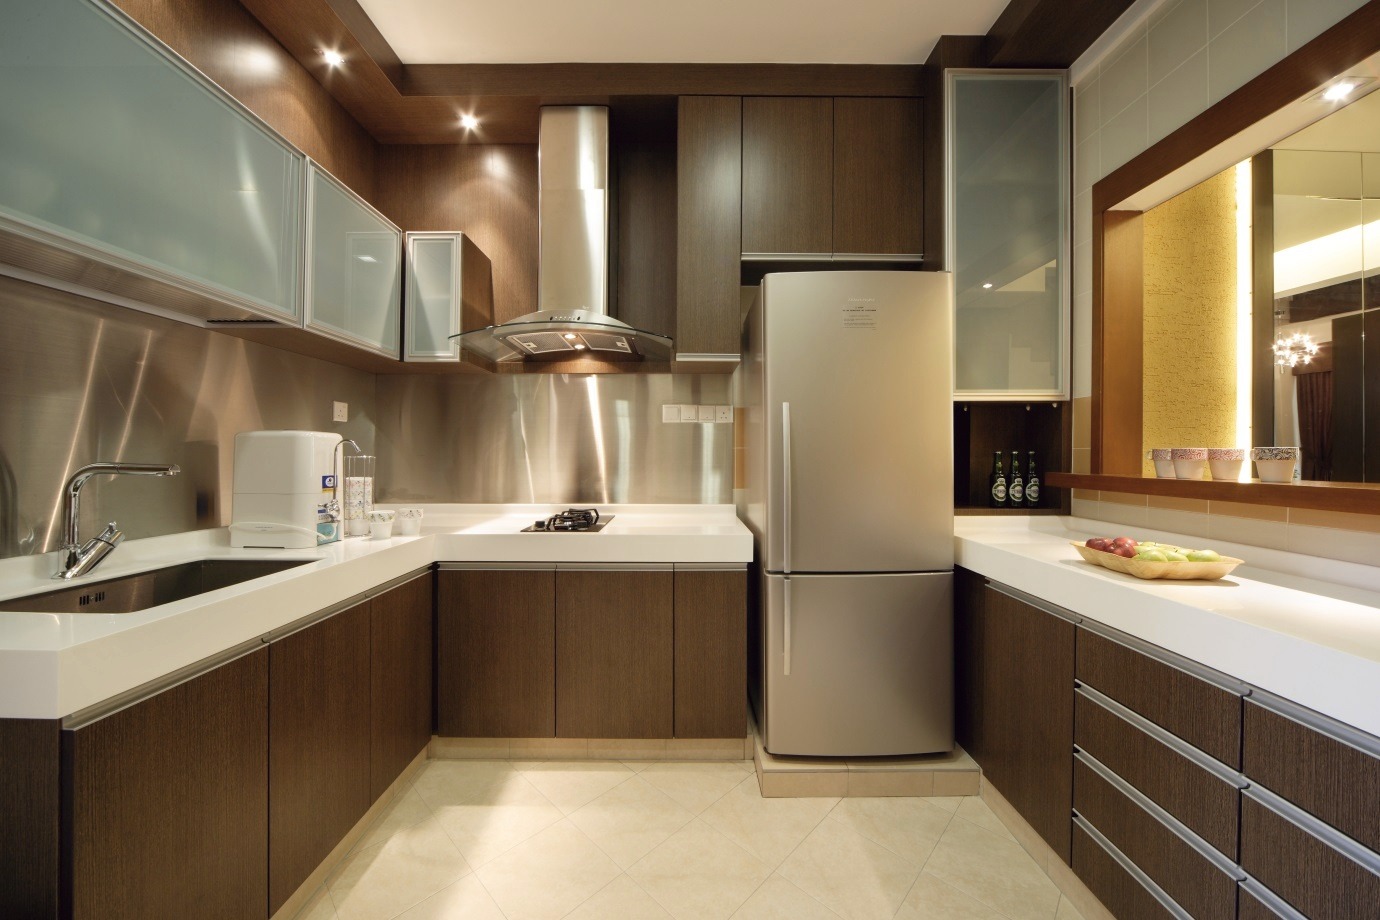 Learn 7 useful and amazing tips for designing kitchen cabinets and making your kitchen better than you can ever imagine.